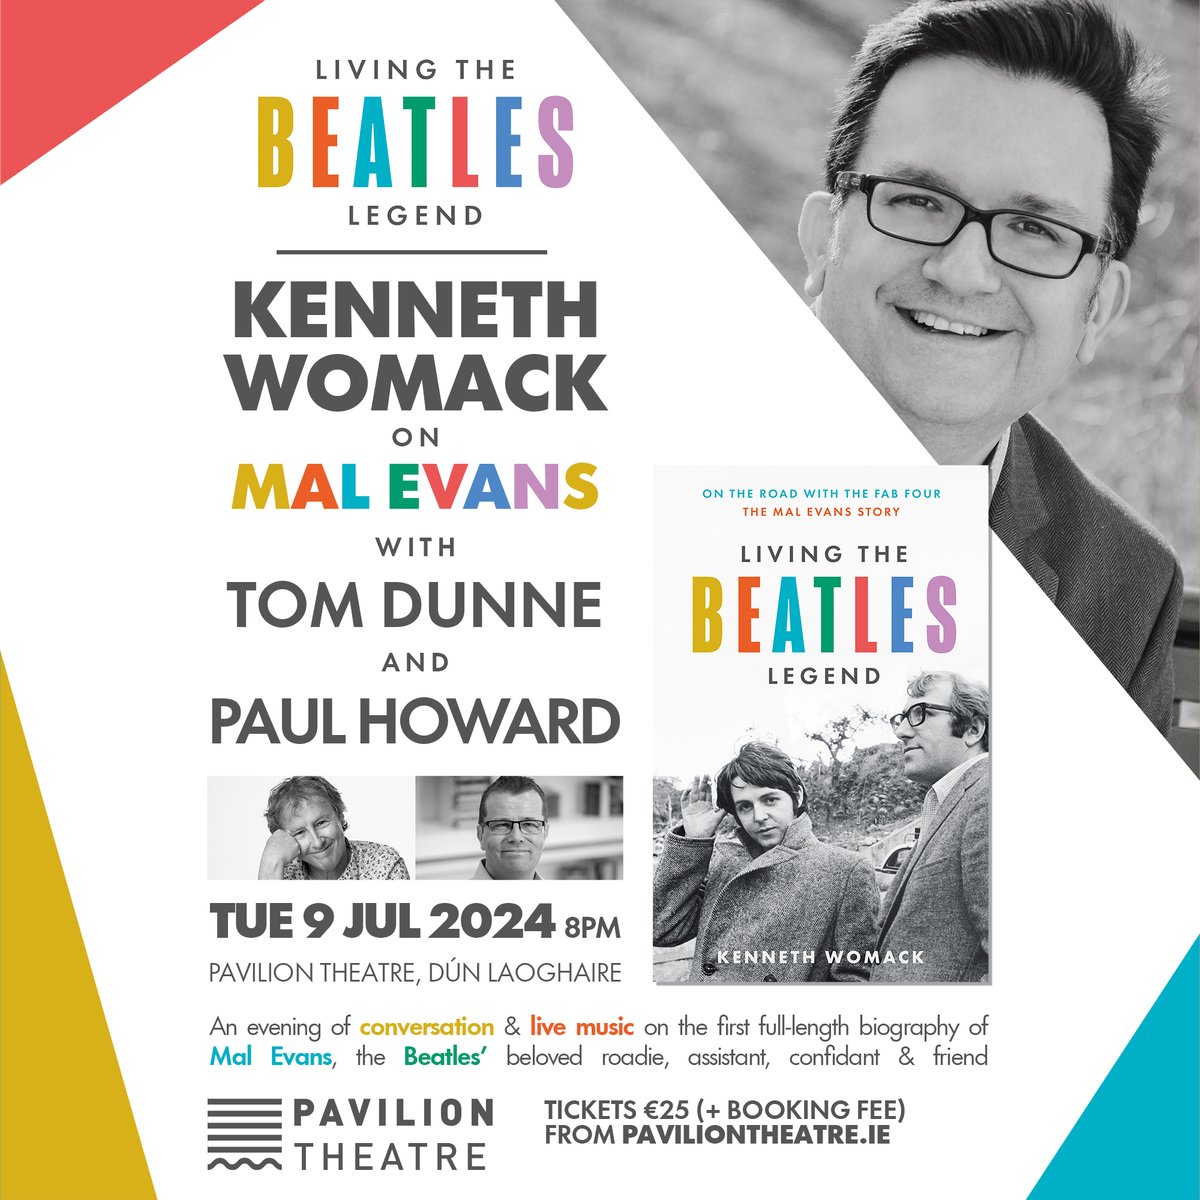 👓 TICKETS ON SALE: Living the Beatles' Legend - @KennethAWomack with @tomhappens & @AkaPaulHoward The Renowned Beatles scholar discusses his new book about roadie Mal Evans with uber Beatles fans Tom Dunne & Paul Howard, plus live music. Tue 9 Jul | tinyurl.com/BeatlesLegend